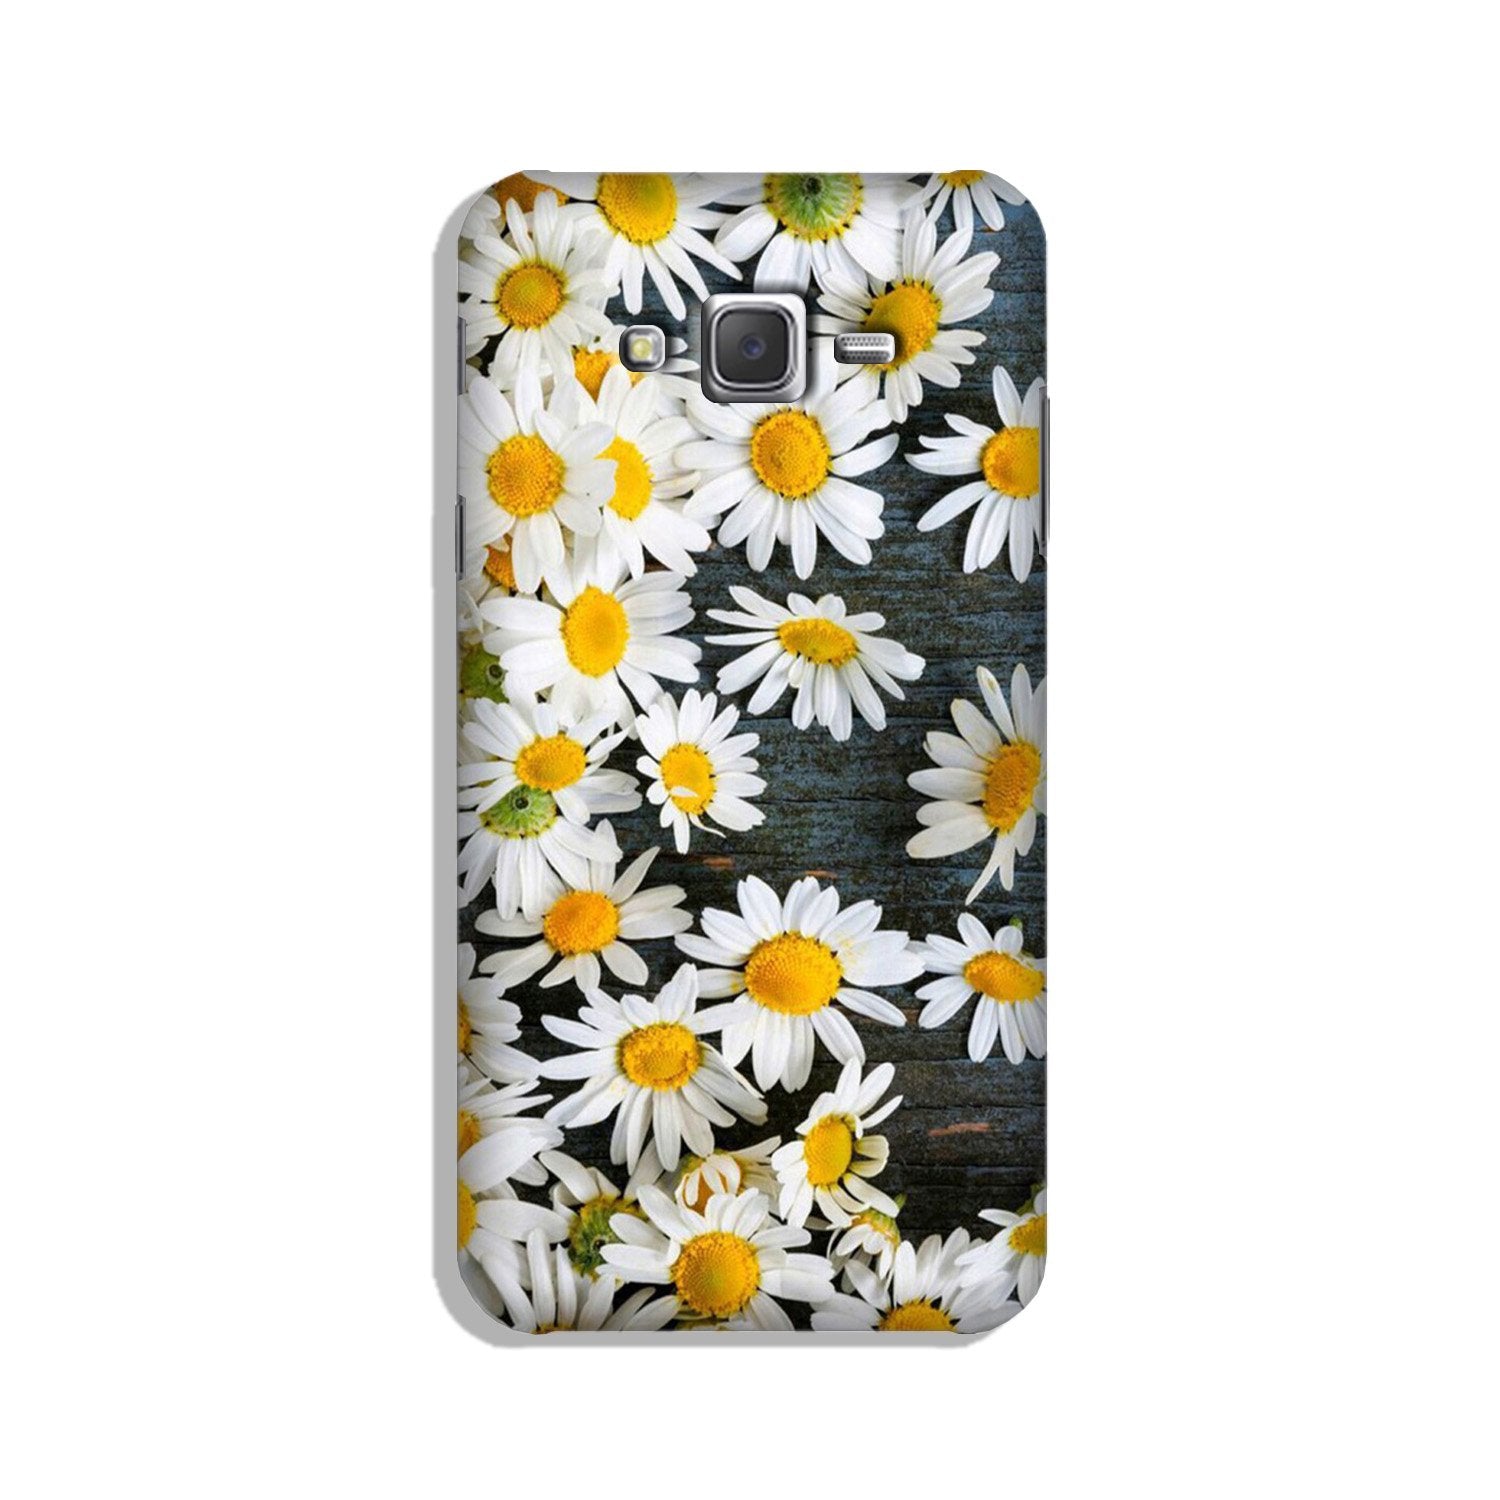 White flowers2 Case for Galaxy J3 (2015)